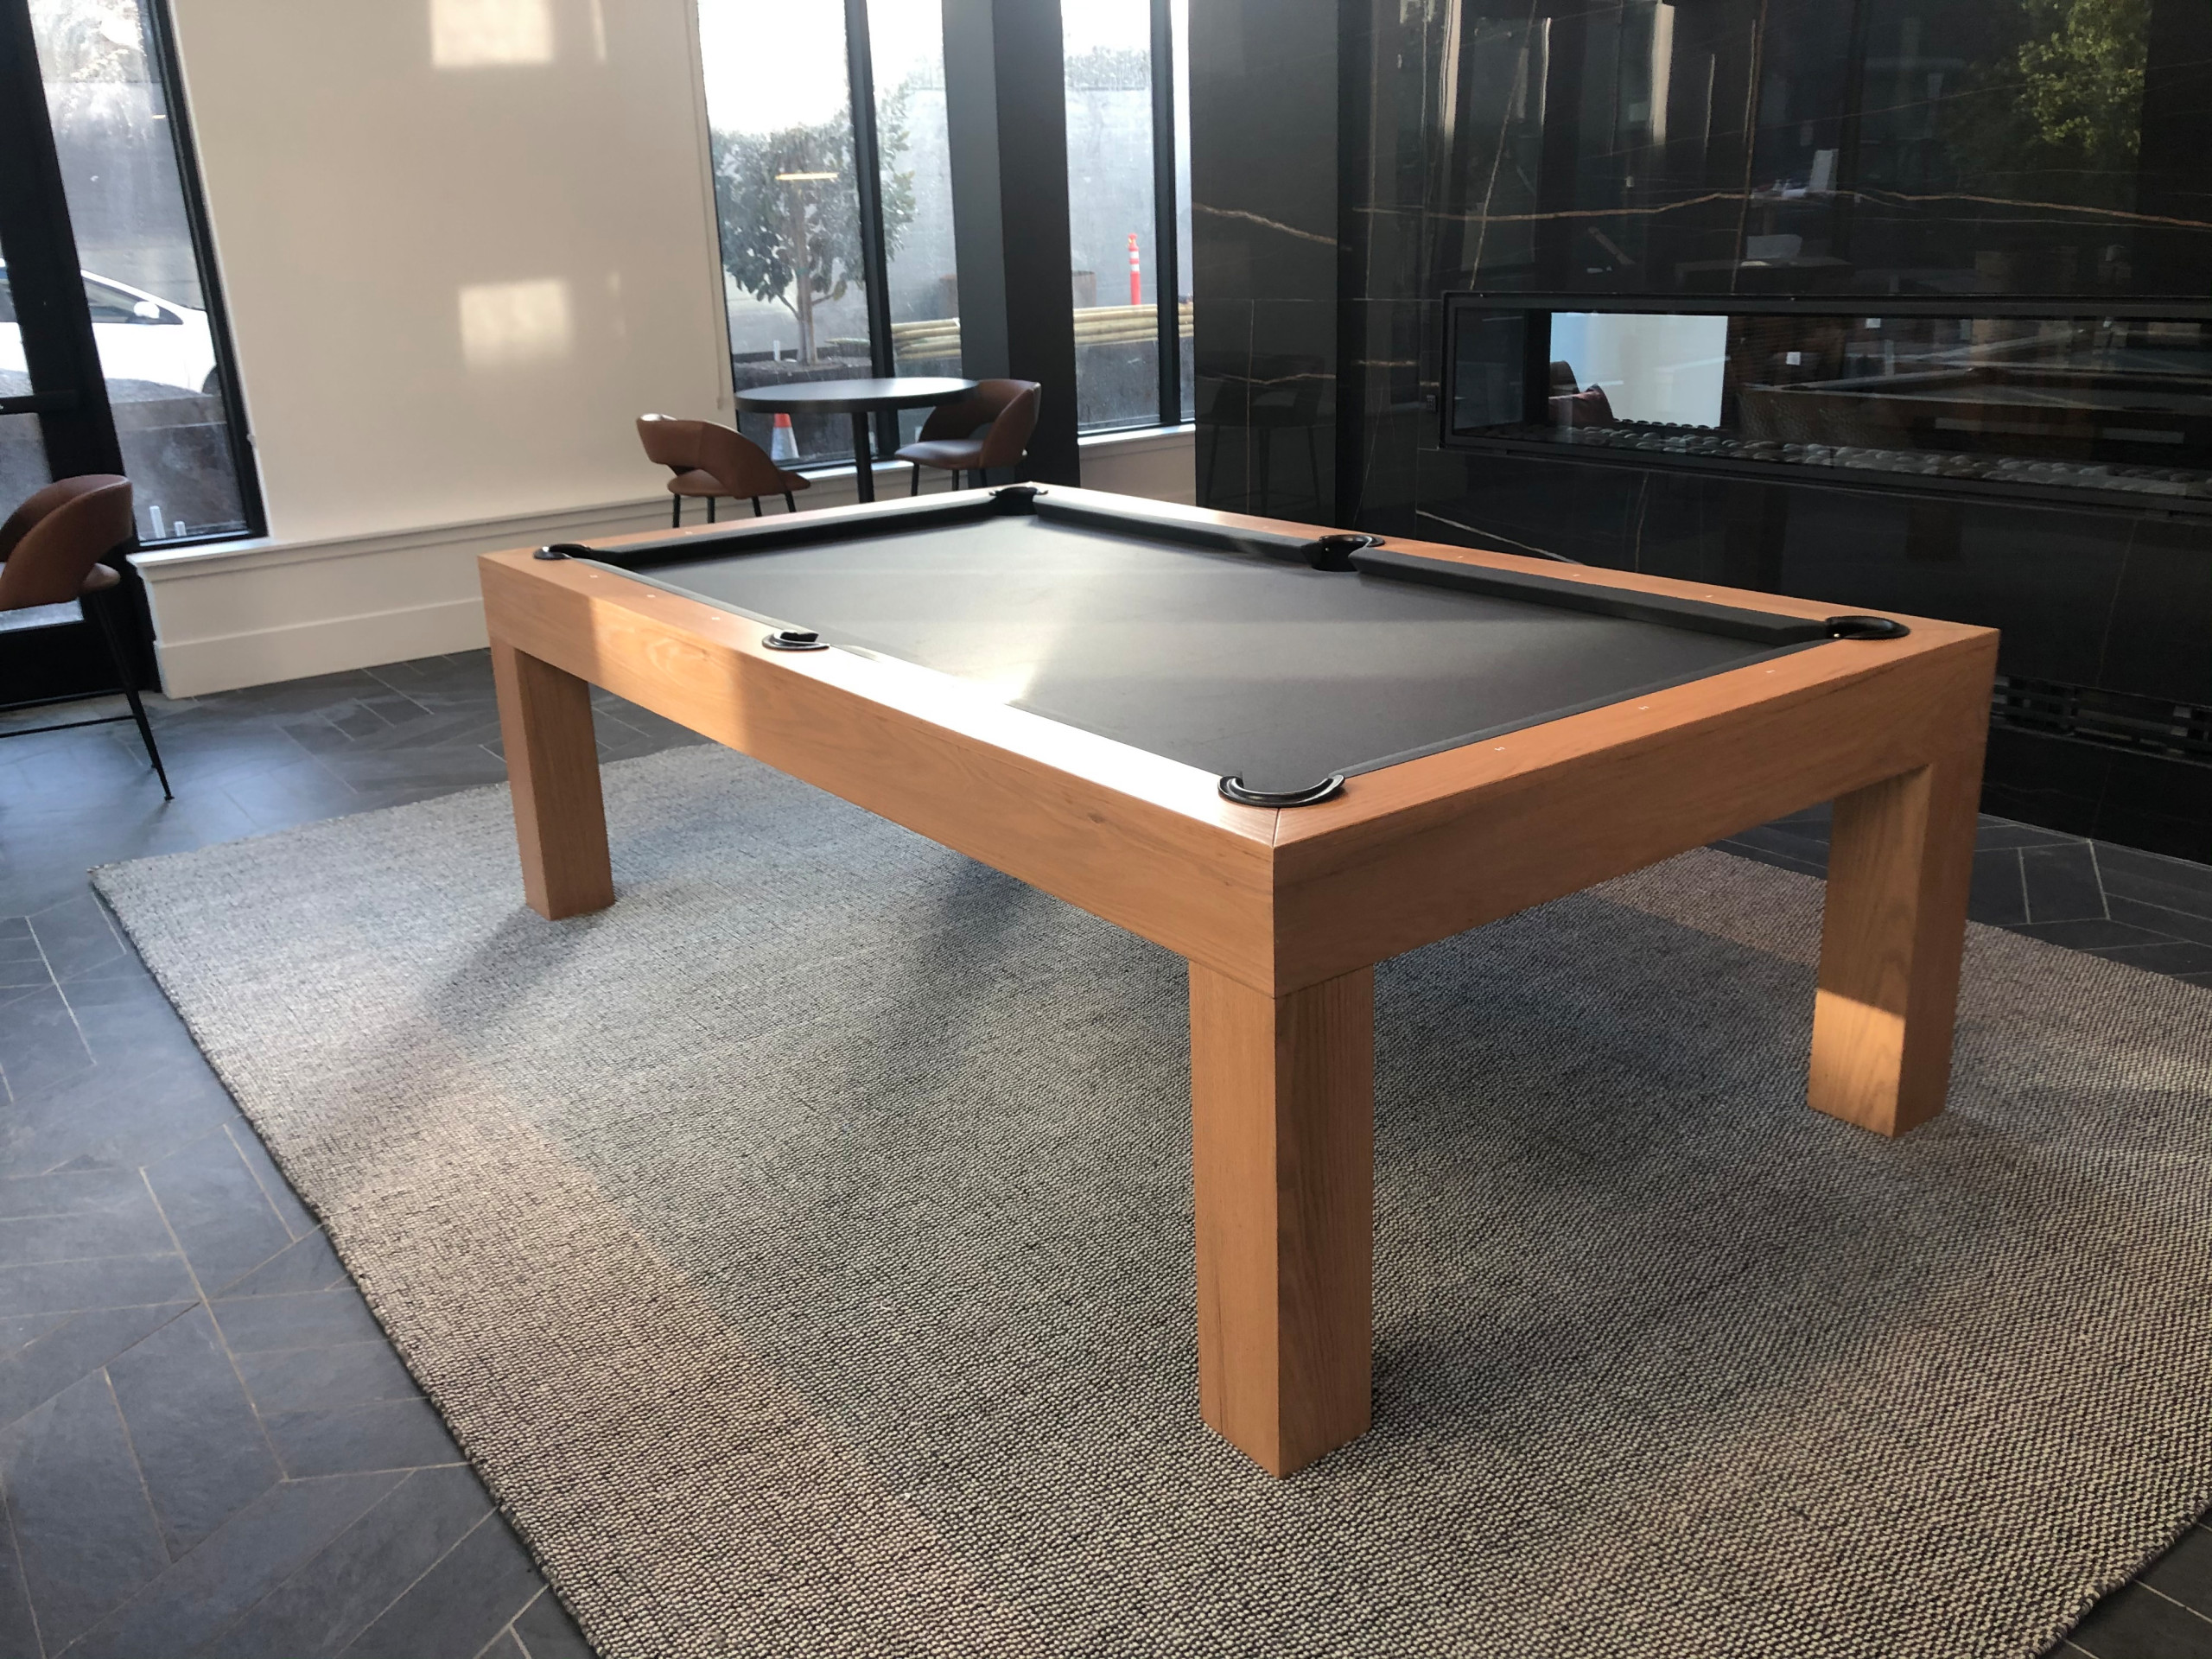 Modern pool table for a game room in an upscale apartment complex